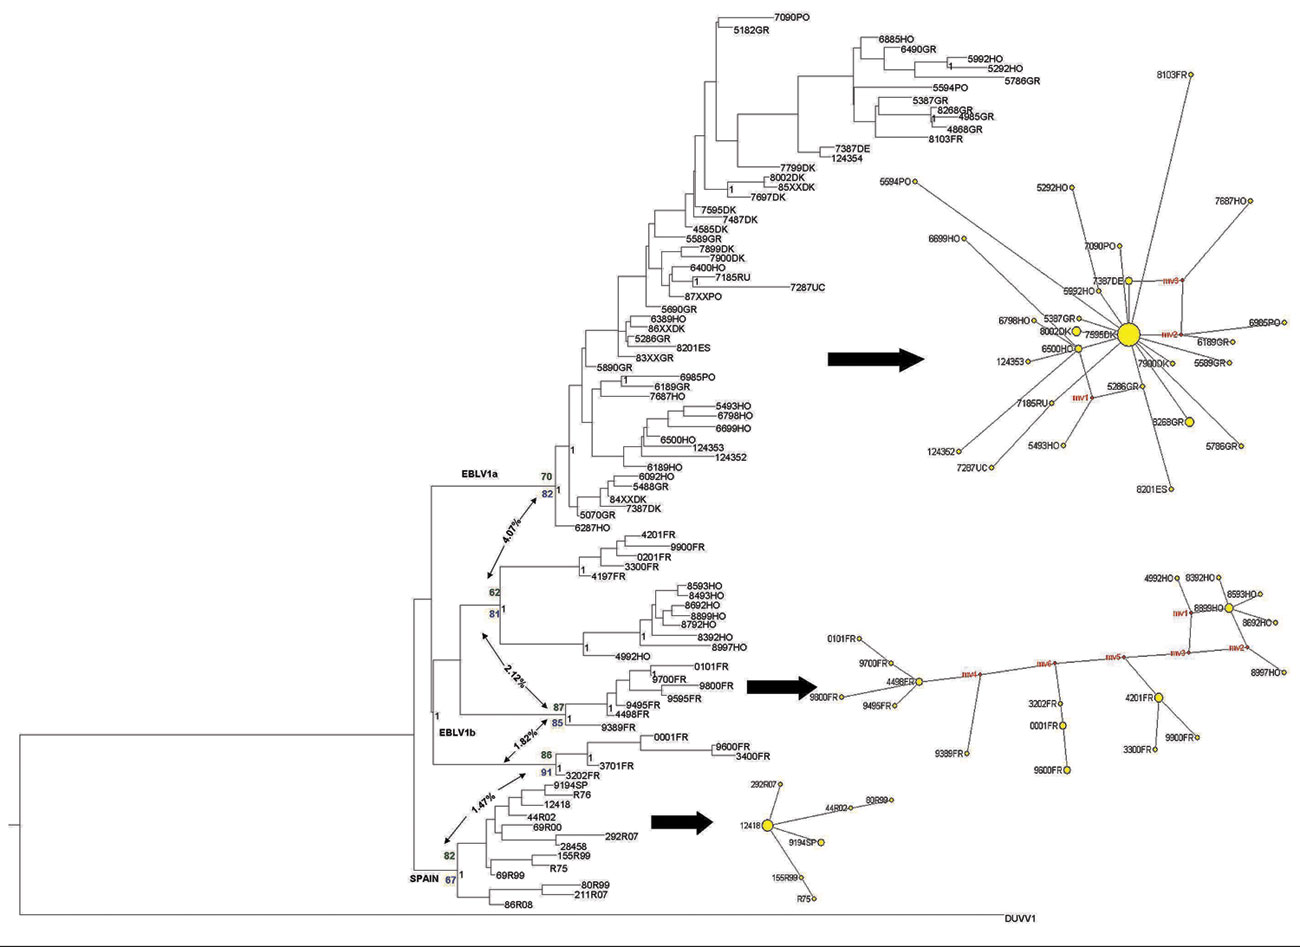 European bat lyssavirus 1 (EBLV-1) phylogenetic reconstruction based on the first 400 bp of the nucleoprotein gene. The tree was obtained by Bayesian inference run for 107 generations; trees were sampled every 100 generations. The first 25% of trees were excluded from the analysis as burn-in. Black numbers indicate posterior probabilities. Bootstrap supports after 1,000 replicates for each node are also shown for maximum-parsimony (green numbers) and maximum-likelihood (blue numbers) analyses. N